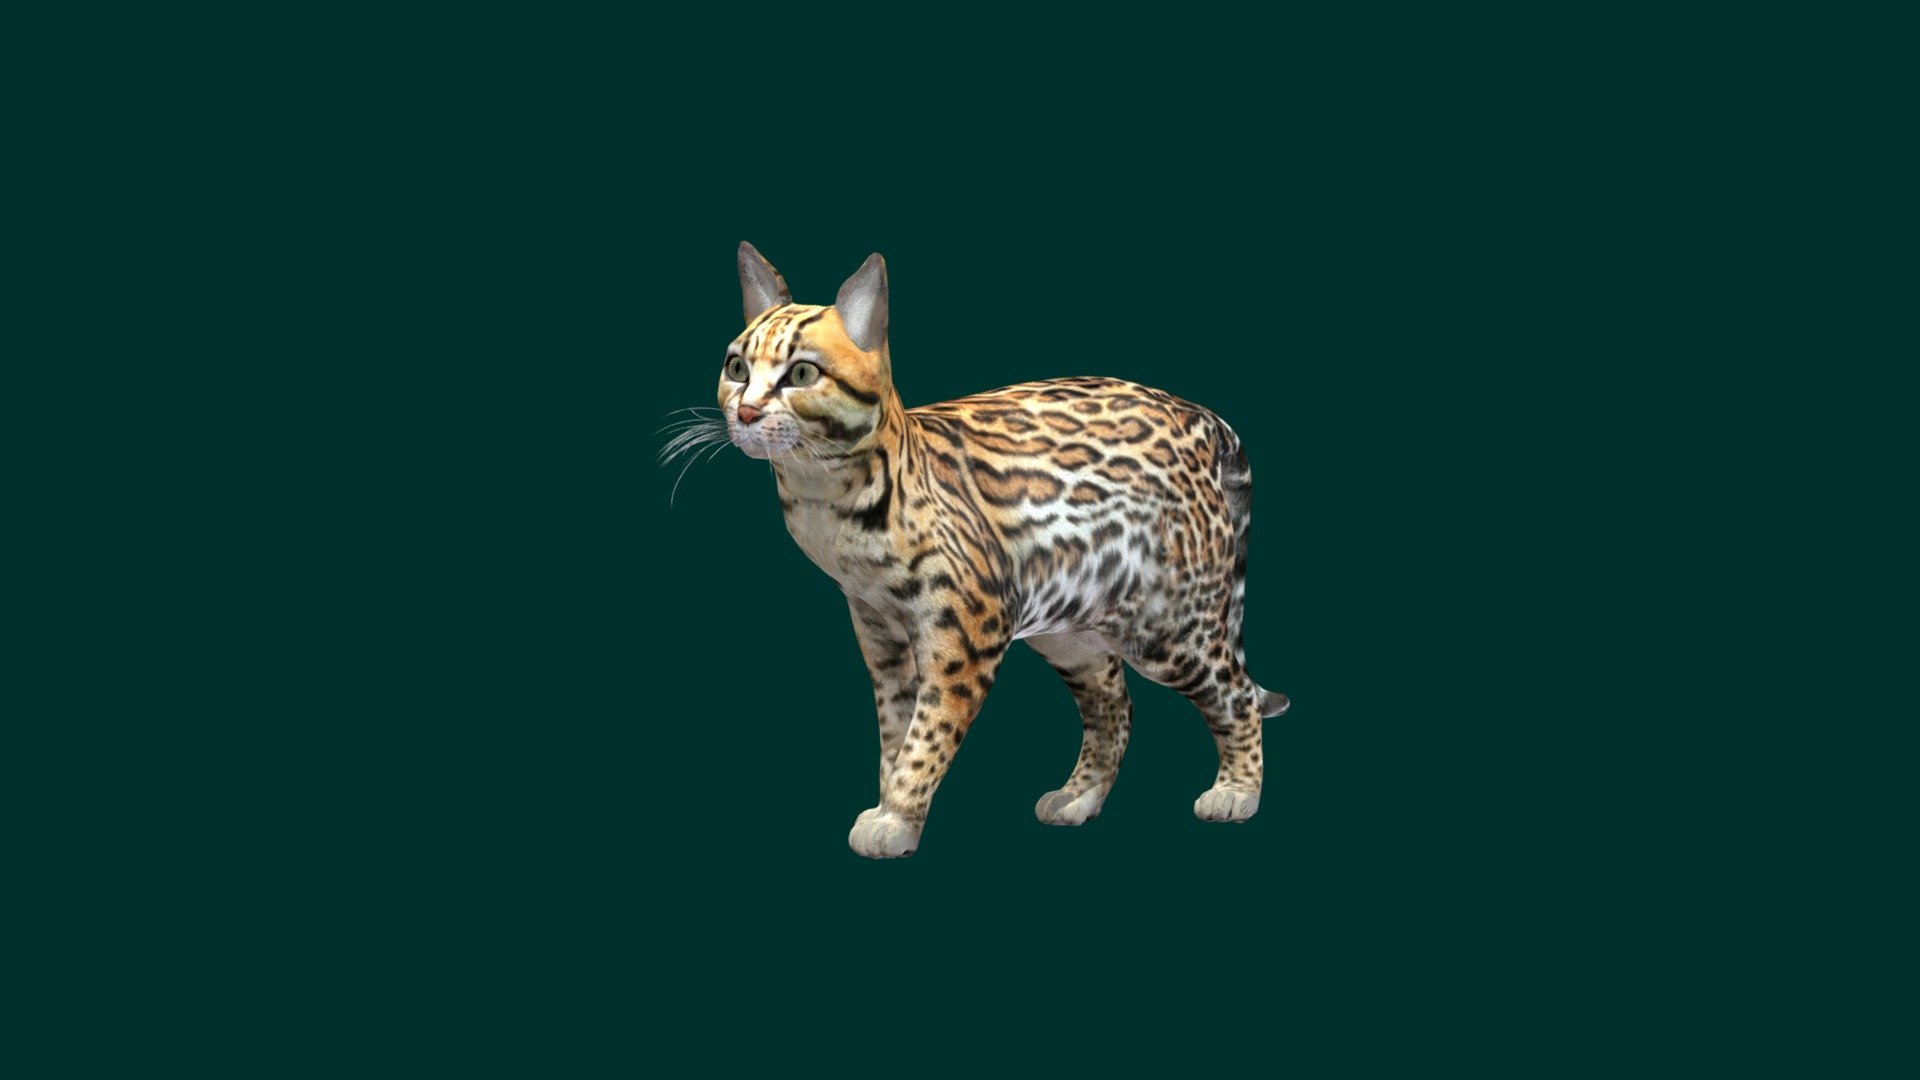 The ocelot is a medium-sized spotted wild cat that reaches 40–50 cm at the shoulders and weighs between 7 and 15.5 kg on average. It is native to the southwestern United States, Mexico, Central and South America, and the Caribbean islands of Trinidad and Margarita. Carl Linnaeus scientifically described it in 1758. Wikipedia
Scientific name: Leopardus pardalis
Conservation status: Least Concern (Population decreasing) Encyclopedia of Life
Mass: 8 – 16 kg
Length: 68 – 100 cm
Trophic level: Carnivorous Encyclopedia of Life
Family: Felidae
Kingdom: Animalia - Ocelot - 3D model by Nyilonelycompany 3d model